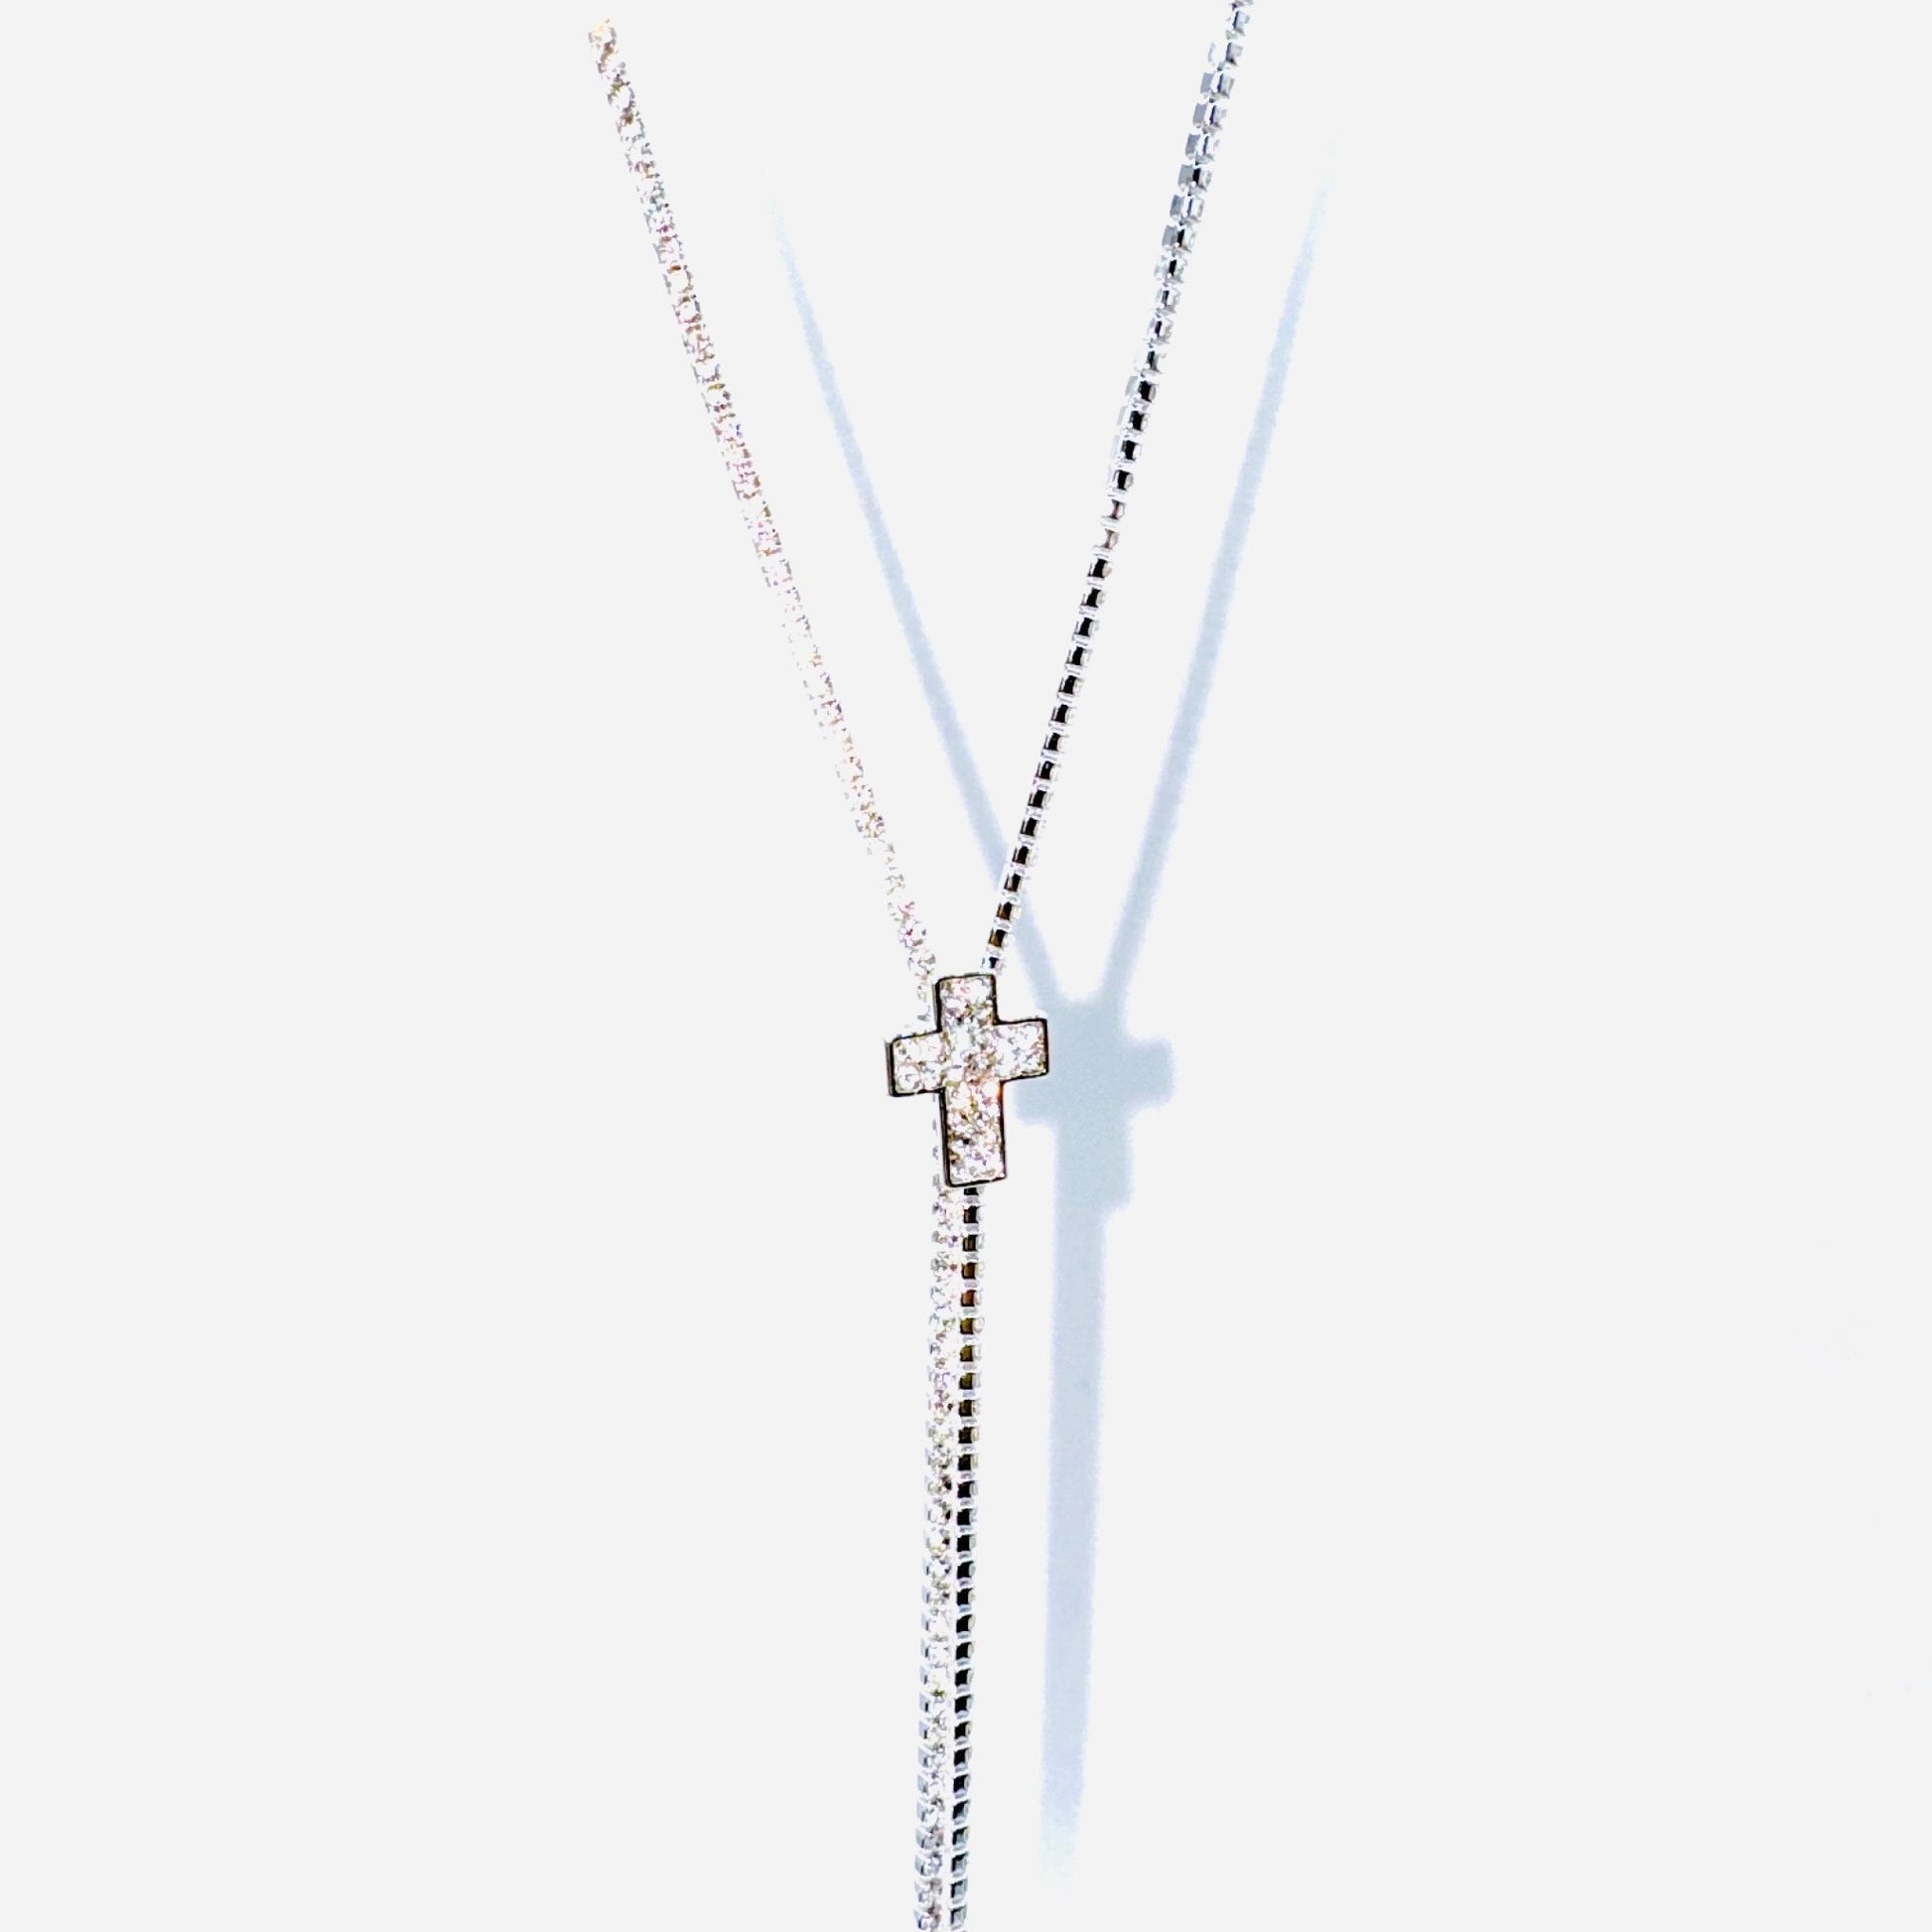 Long Rhinestone Slider Necklaces - House of FaSHUN by Shun Melson